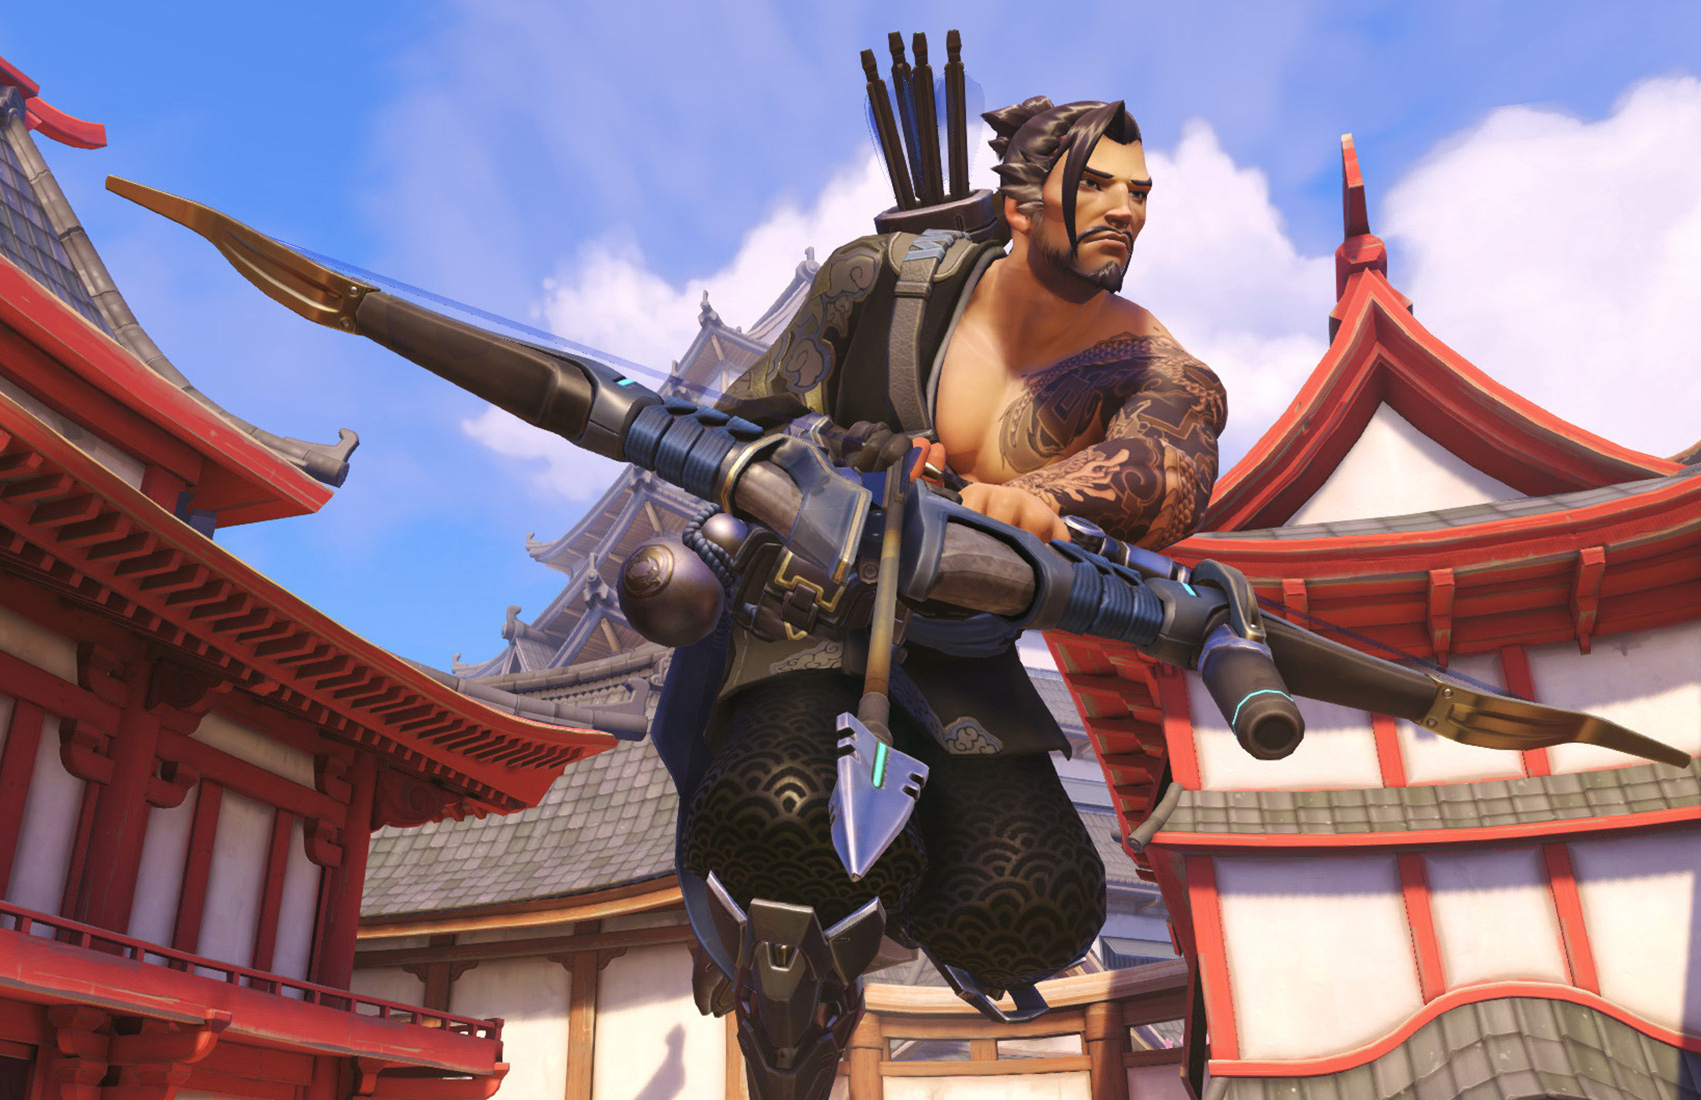 Overwatch 2 release details seemingly leaked by 